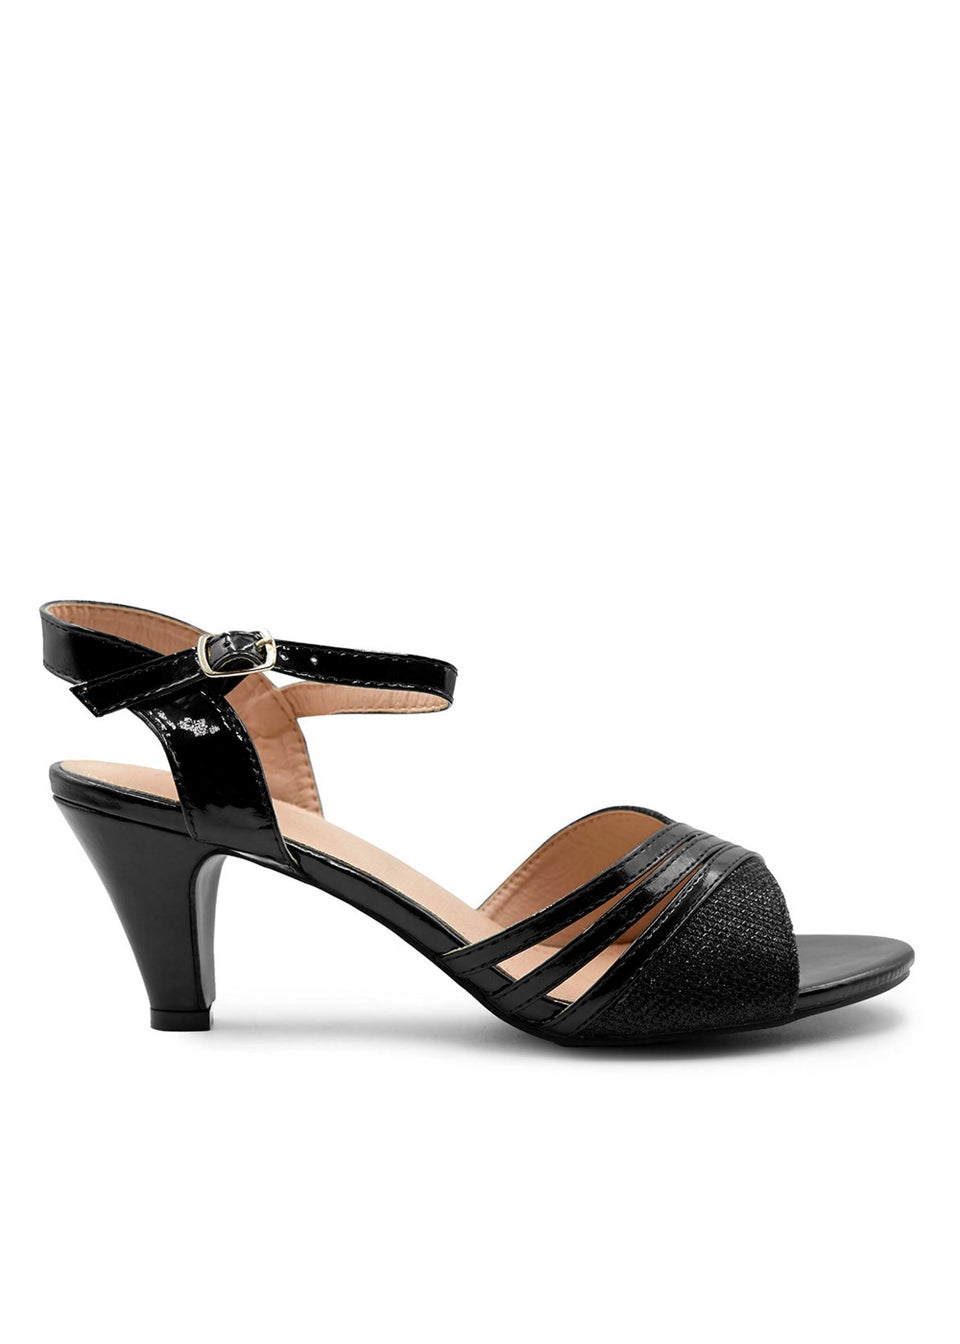 Where's That From Stormi Low Heel Sandals In Black Glitter